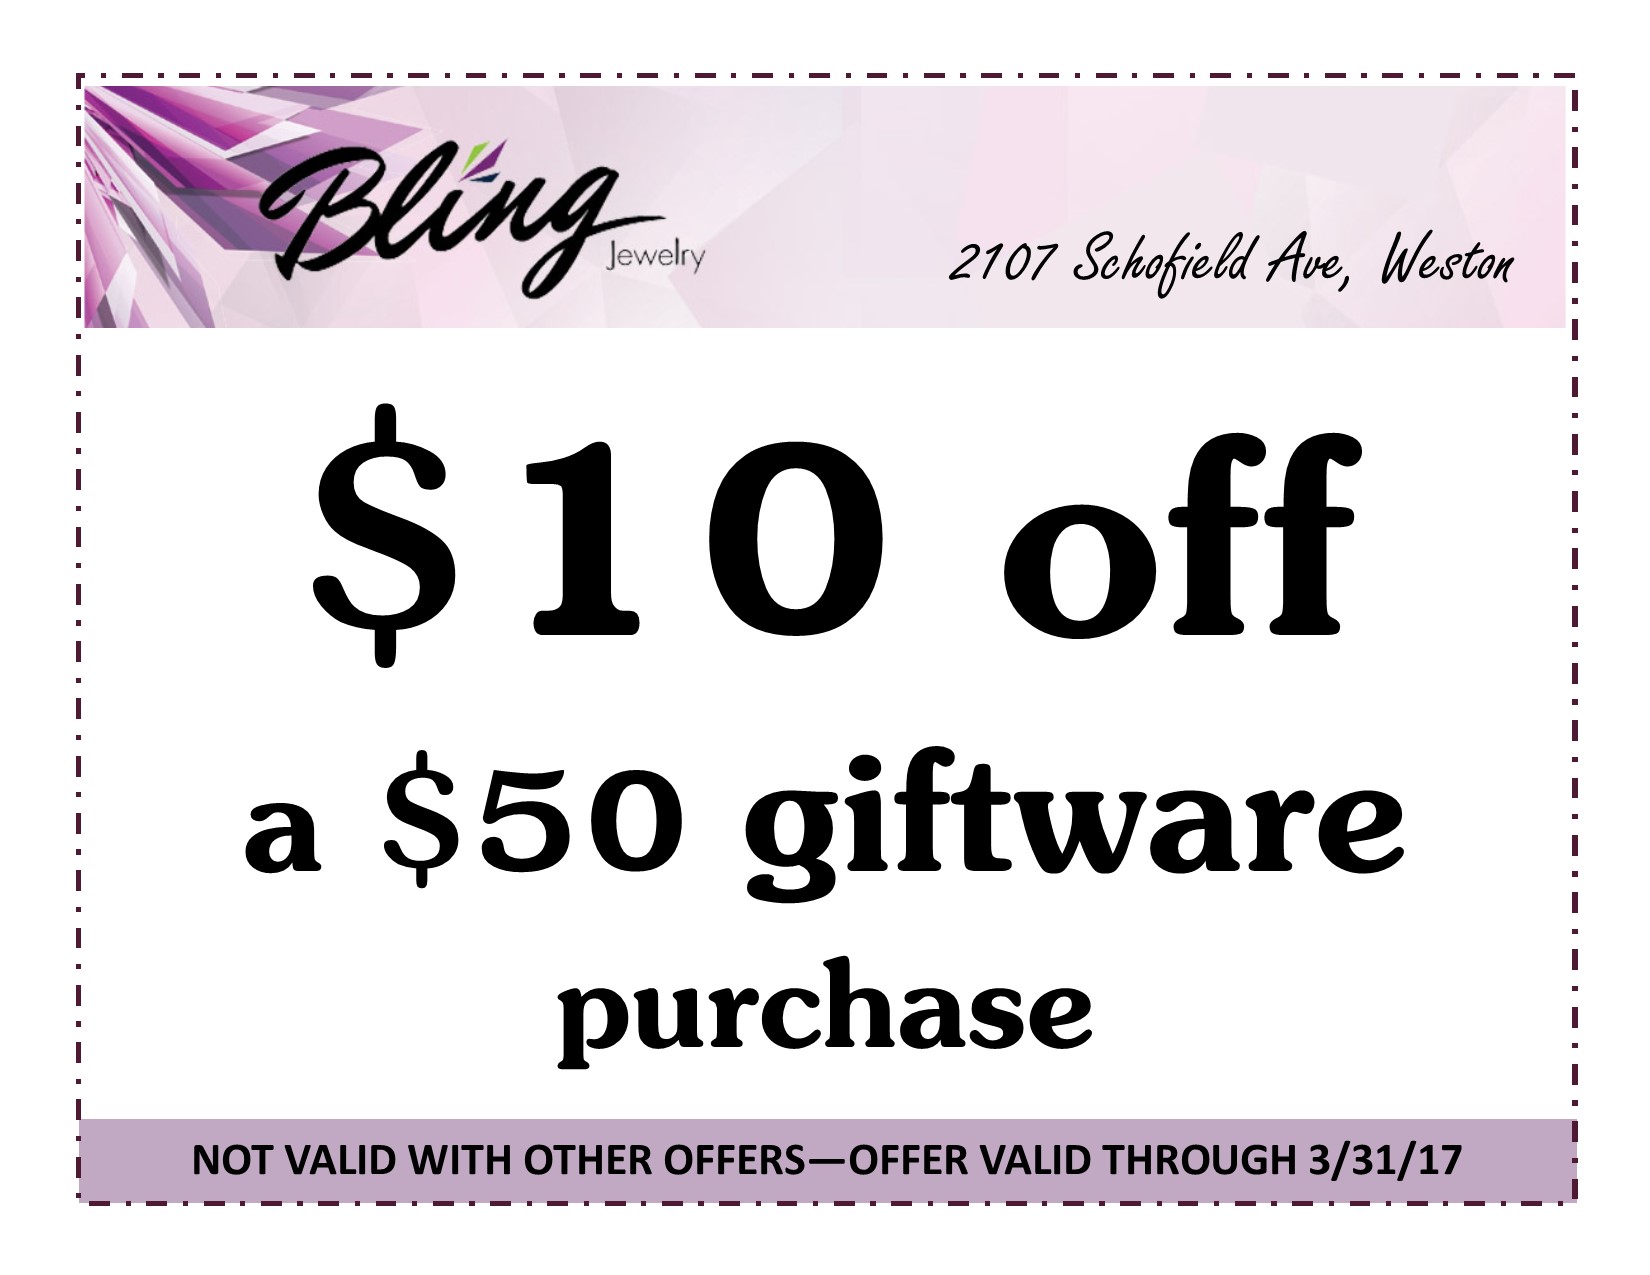   Coupons in Wausau Area